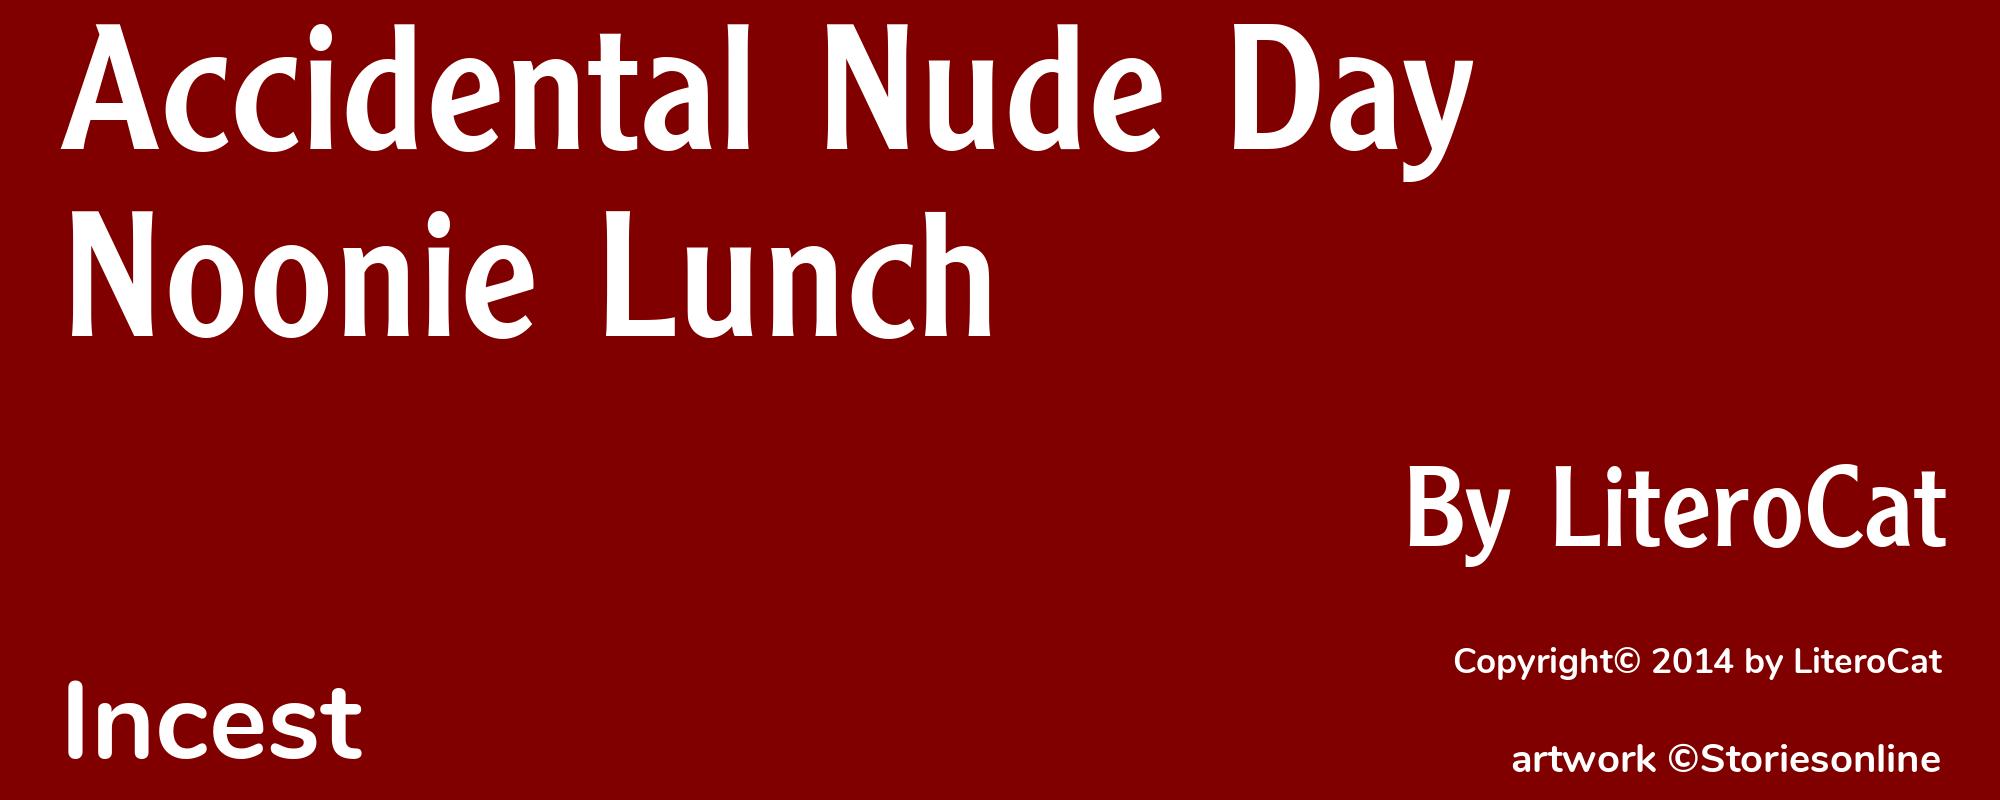 Accidental Nude Day Noonie Lunch - Cover